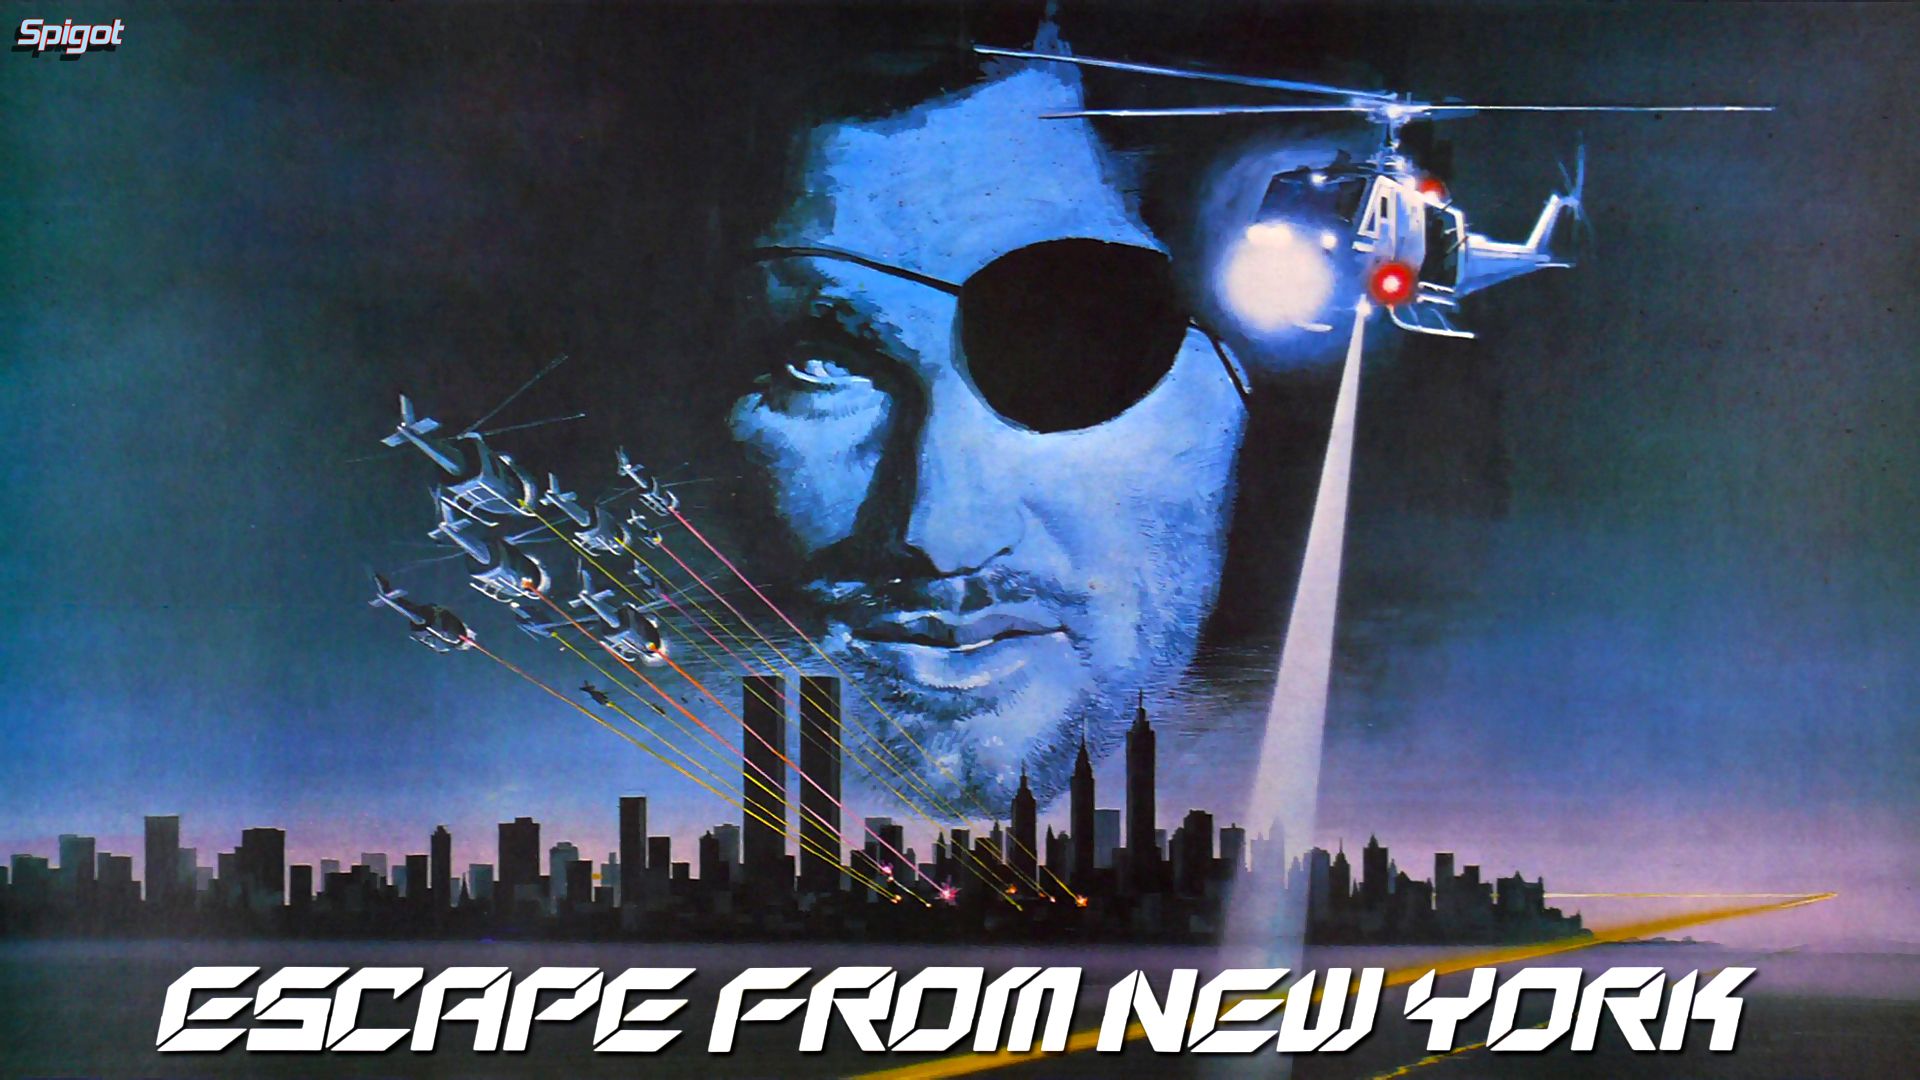 Escape From New York Wallpaper. New Year Wallpaper, New York City Wallpaper and New 52 Superman Wallpaper